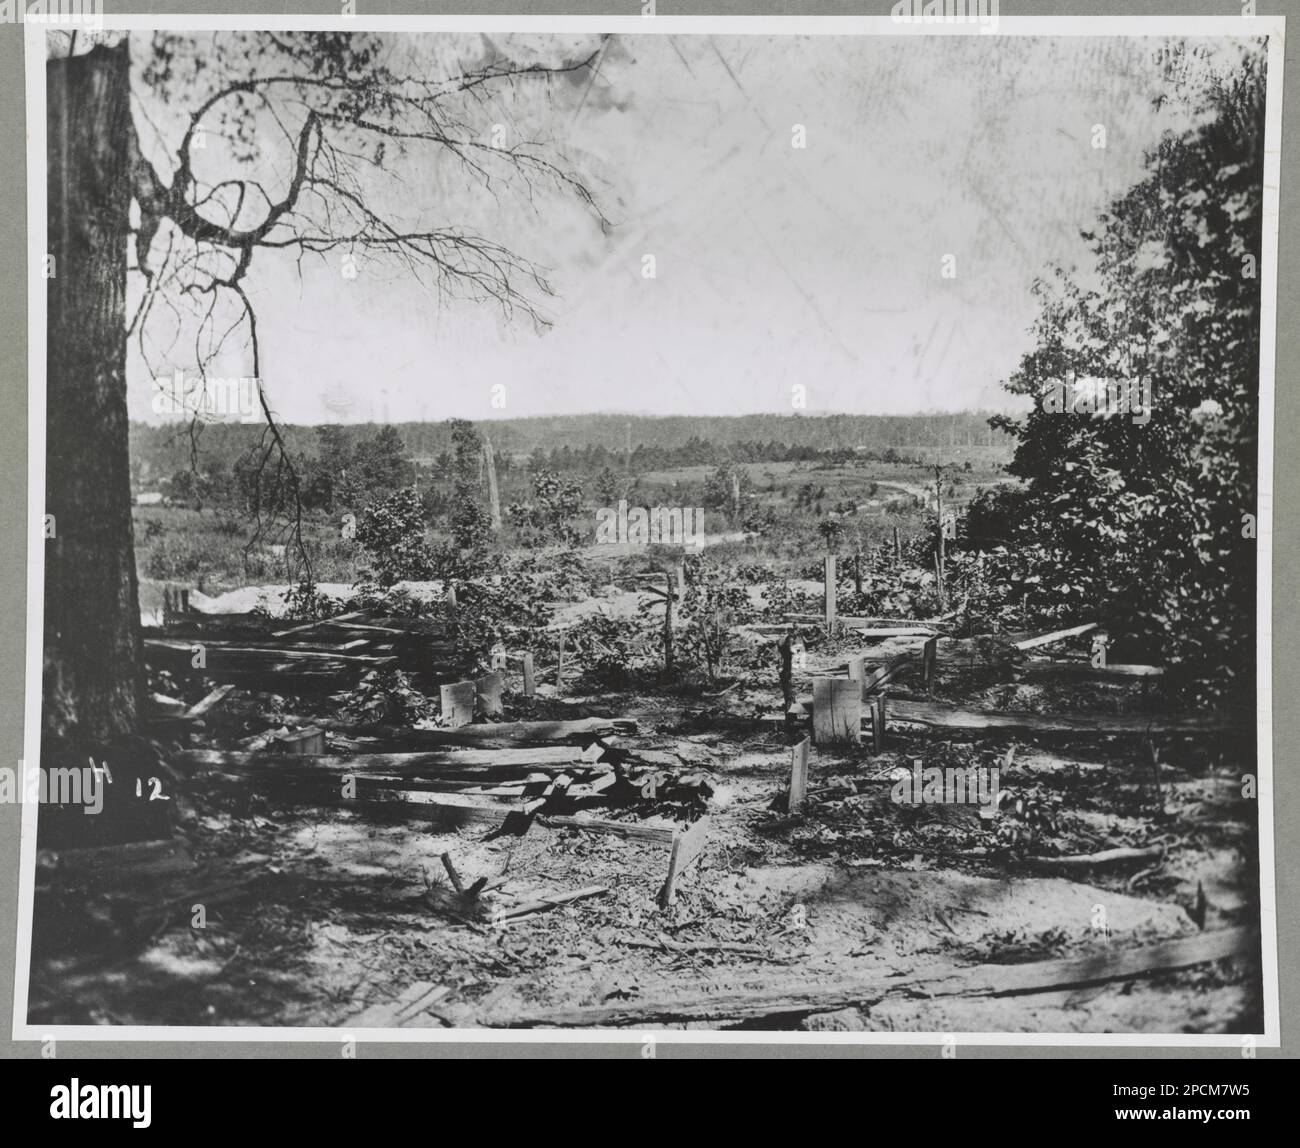 View of battlefield. Peach Tree Creek, Ga.. Part of Brady-Handy Collection, Title from item, Published in: Barnard, George N, Photographic views of Sherman's campaign. New York: Dover Publishers, 1977, E475.97 .B32 1977, Hand written on verso: Similar to Miller III, 125. United States, History, Civil War, 1861-1865, United States, Georgia. Stock Photo